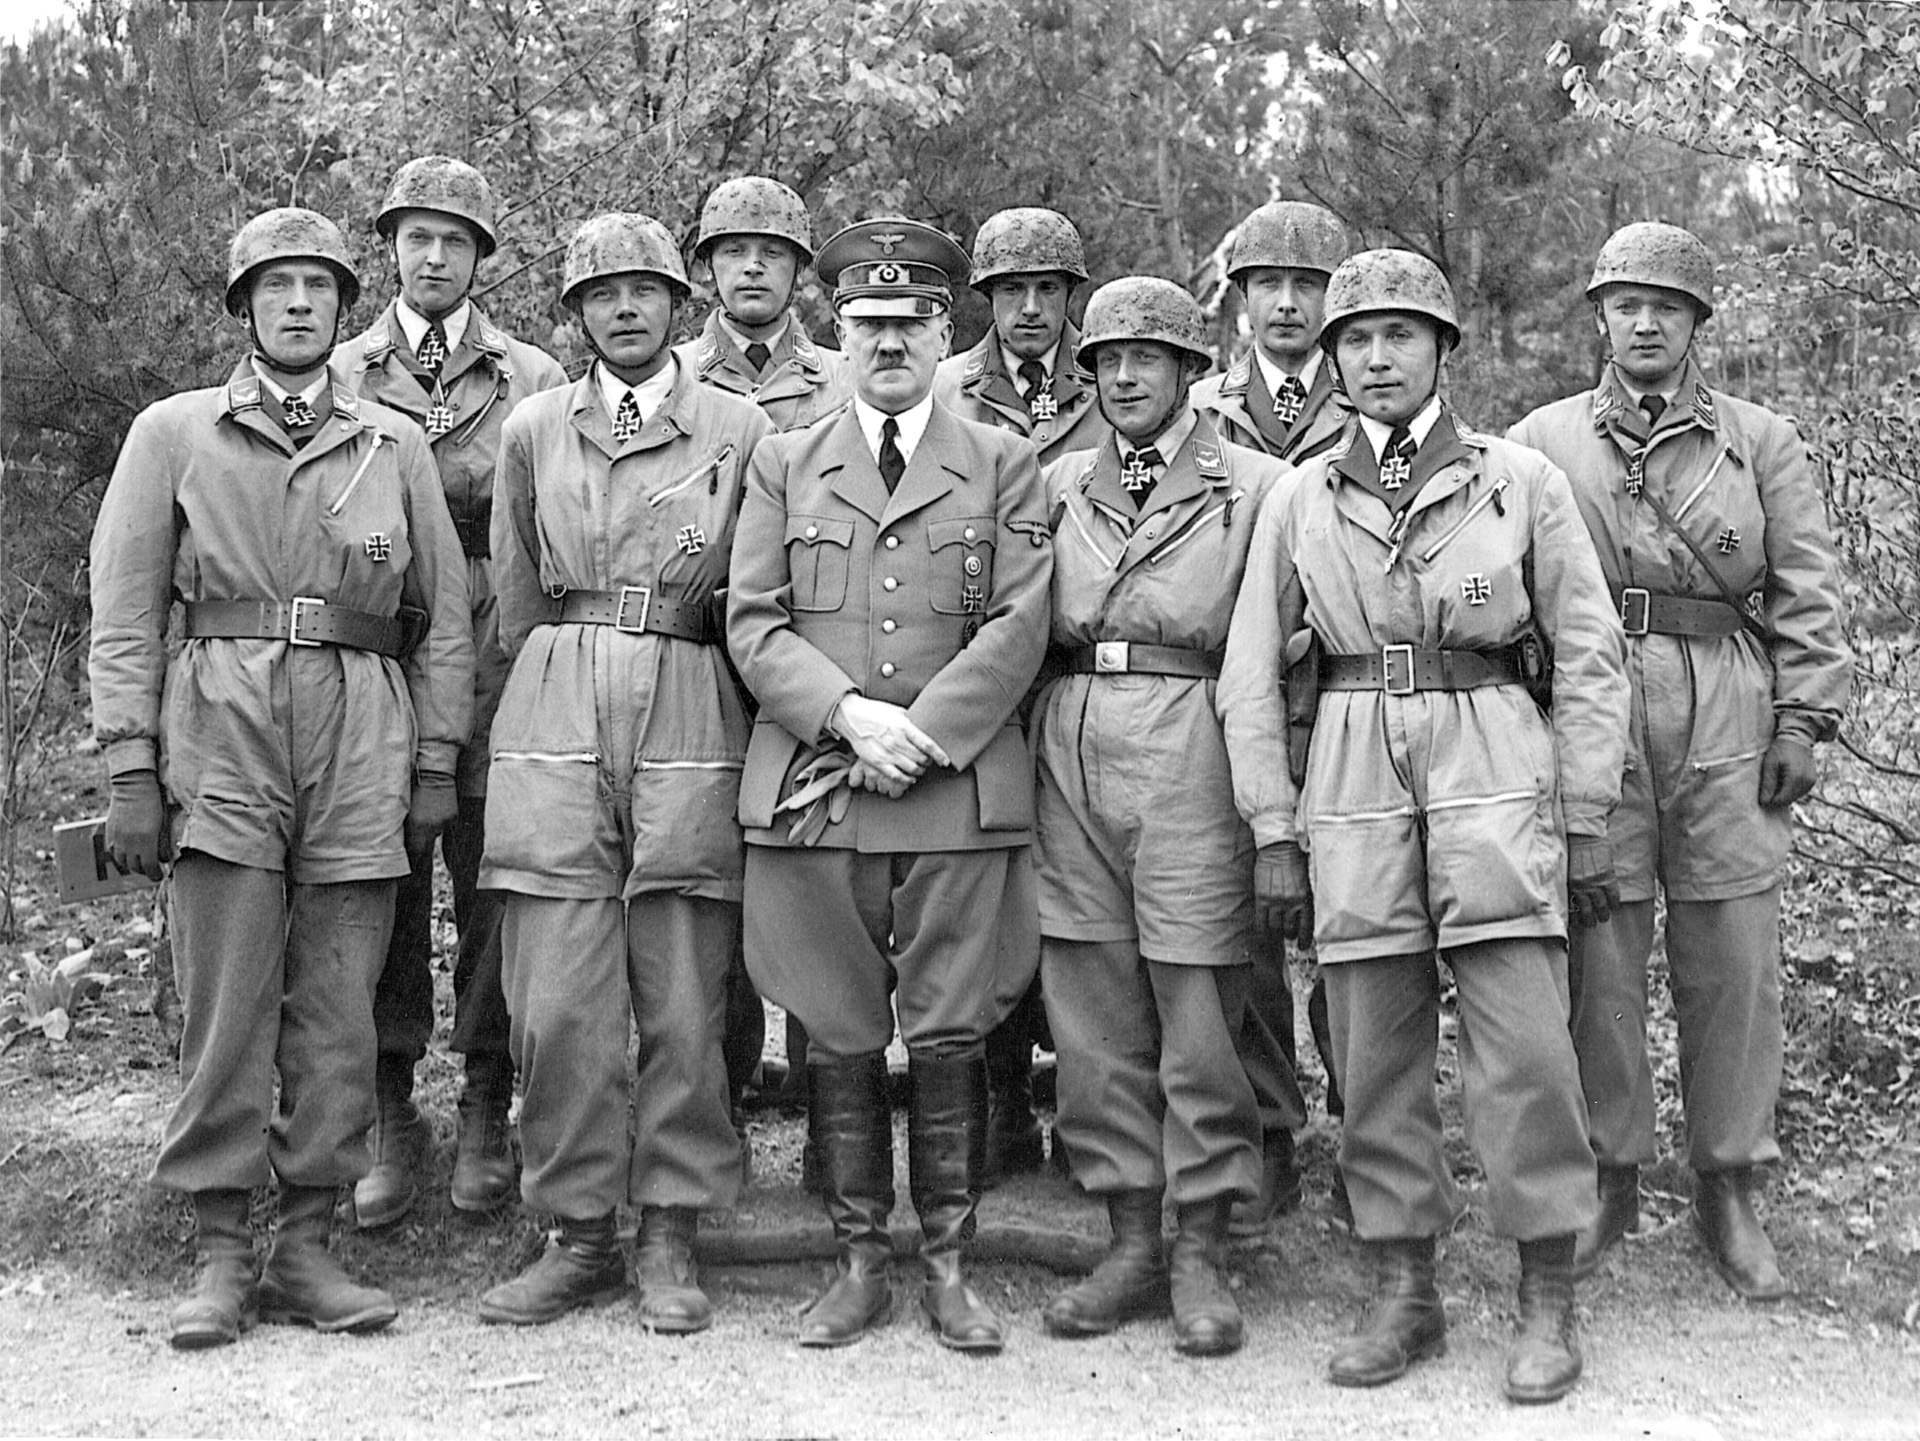 After their successful assault, decorated fallschirmjäger, including Oberleutnant Witzig (second from left) and Hauptmann Koch (third from left), pose with their Führer.